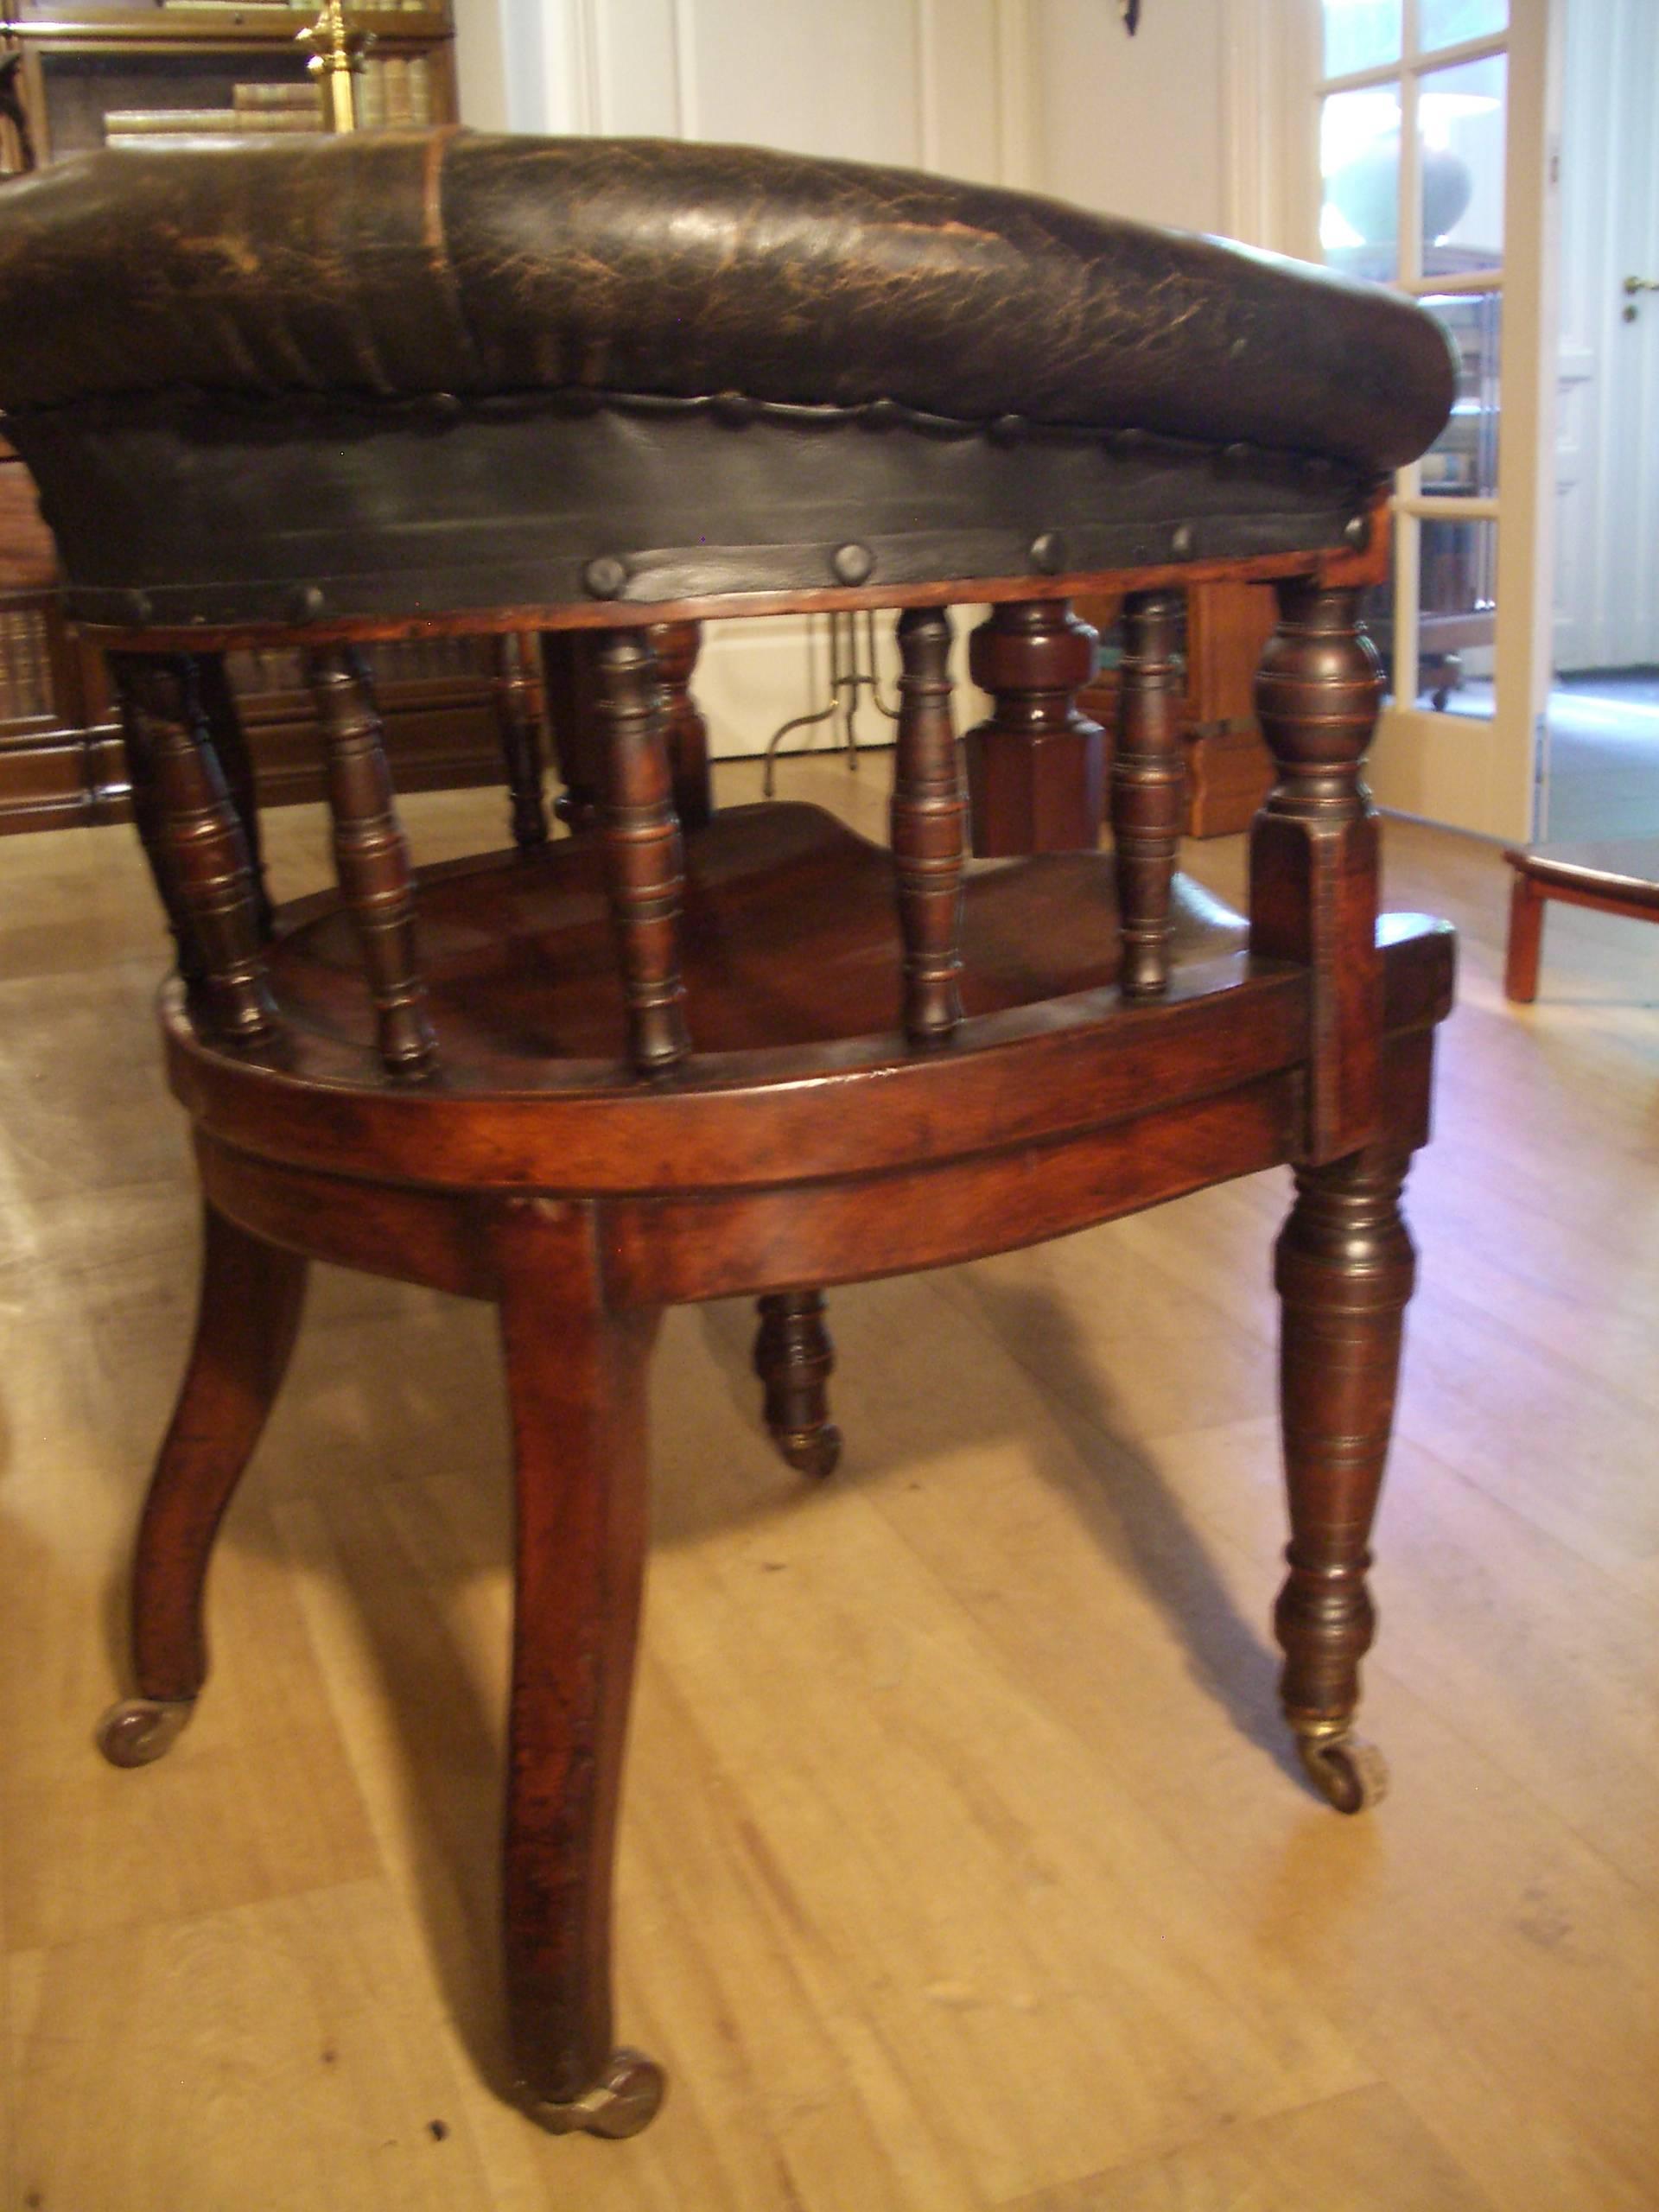 Beautiful Mahogany Desk Chair with Leather Upholstery 3